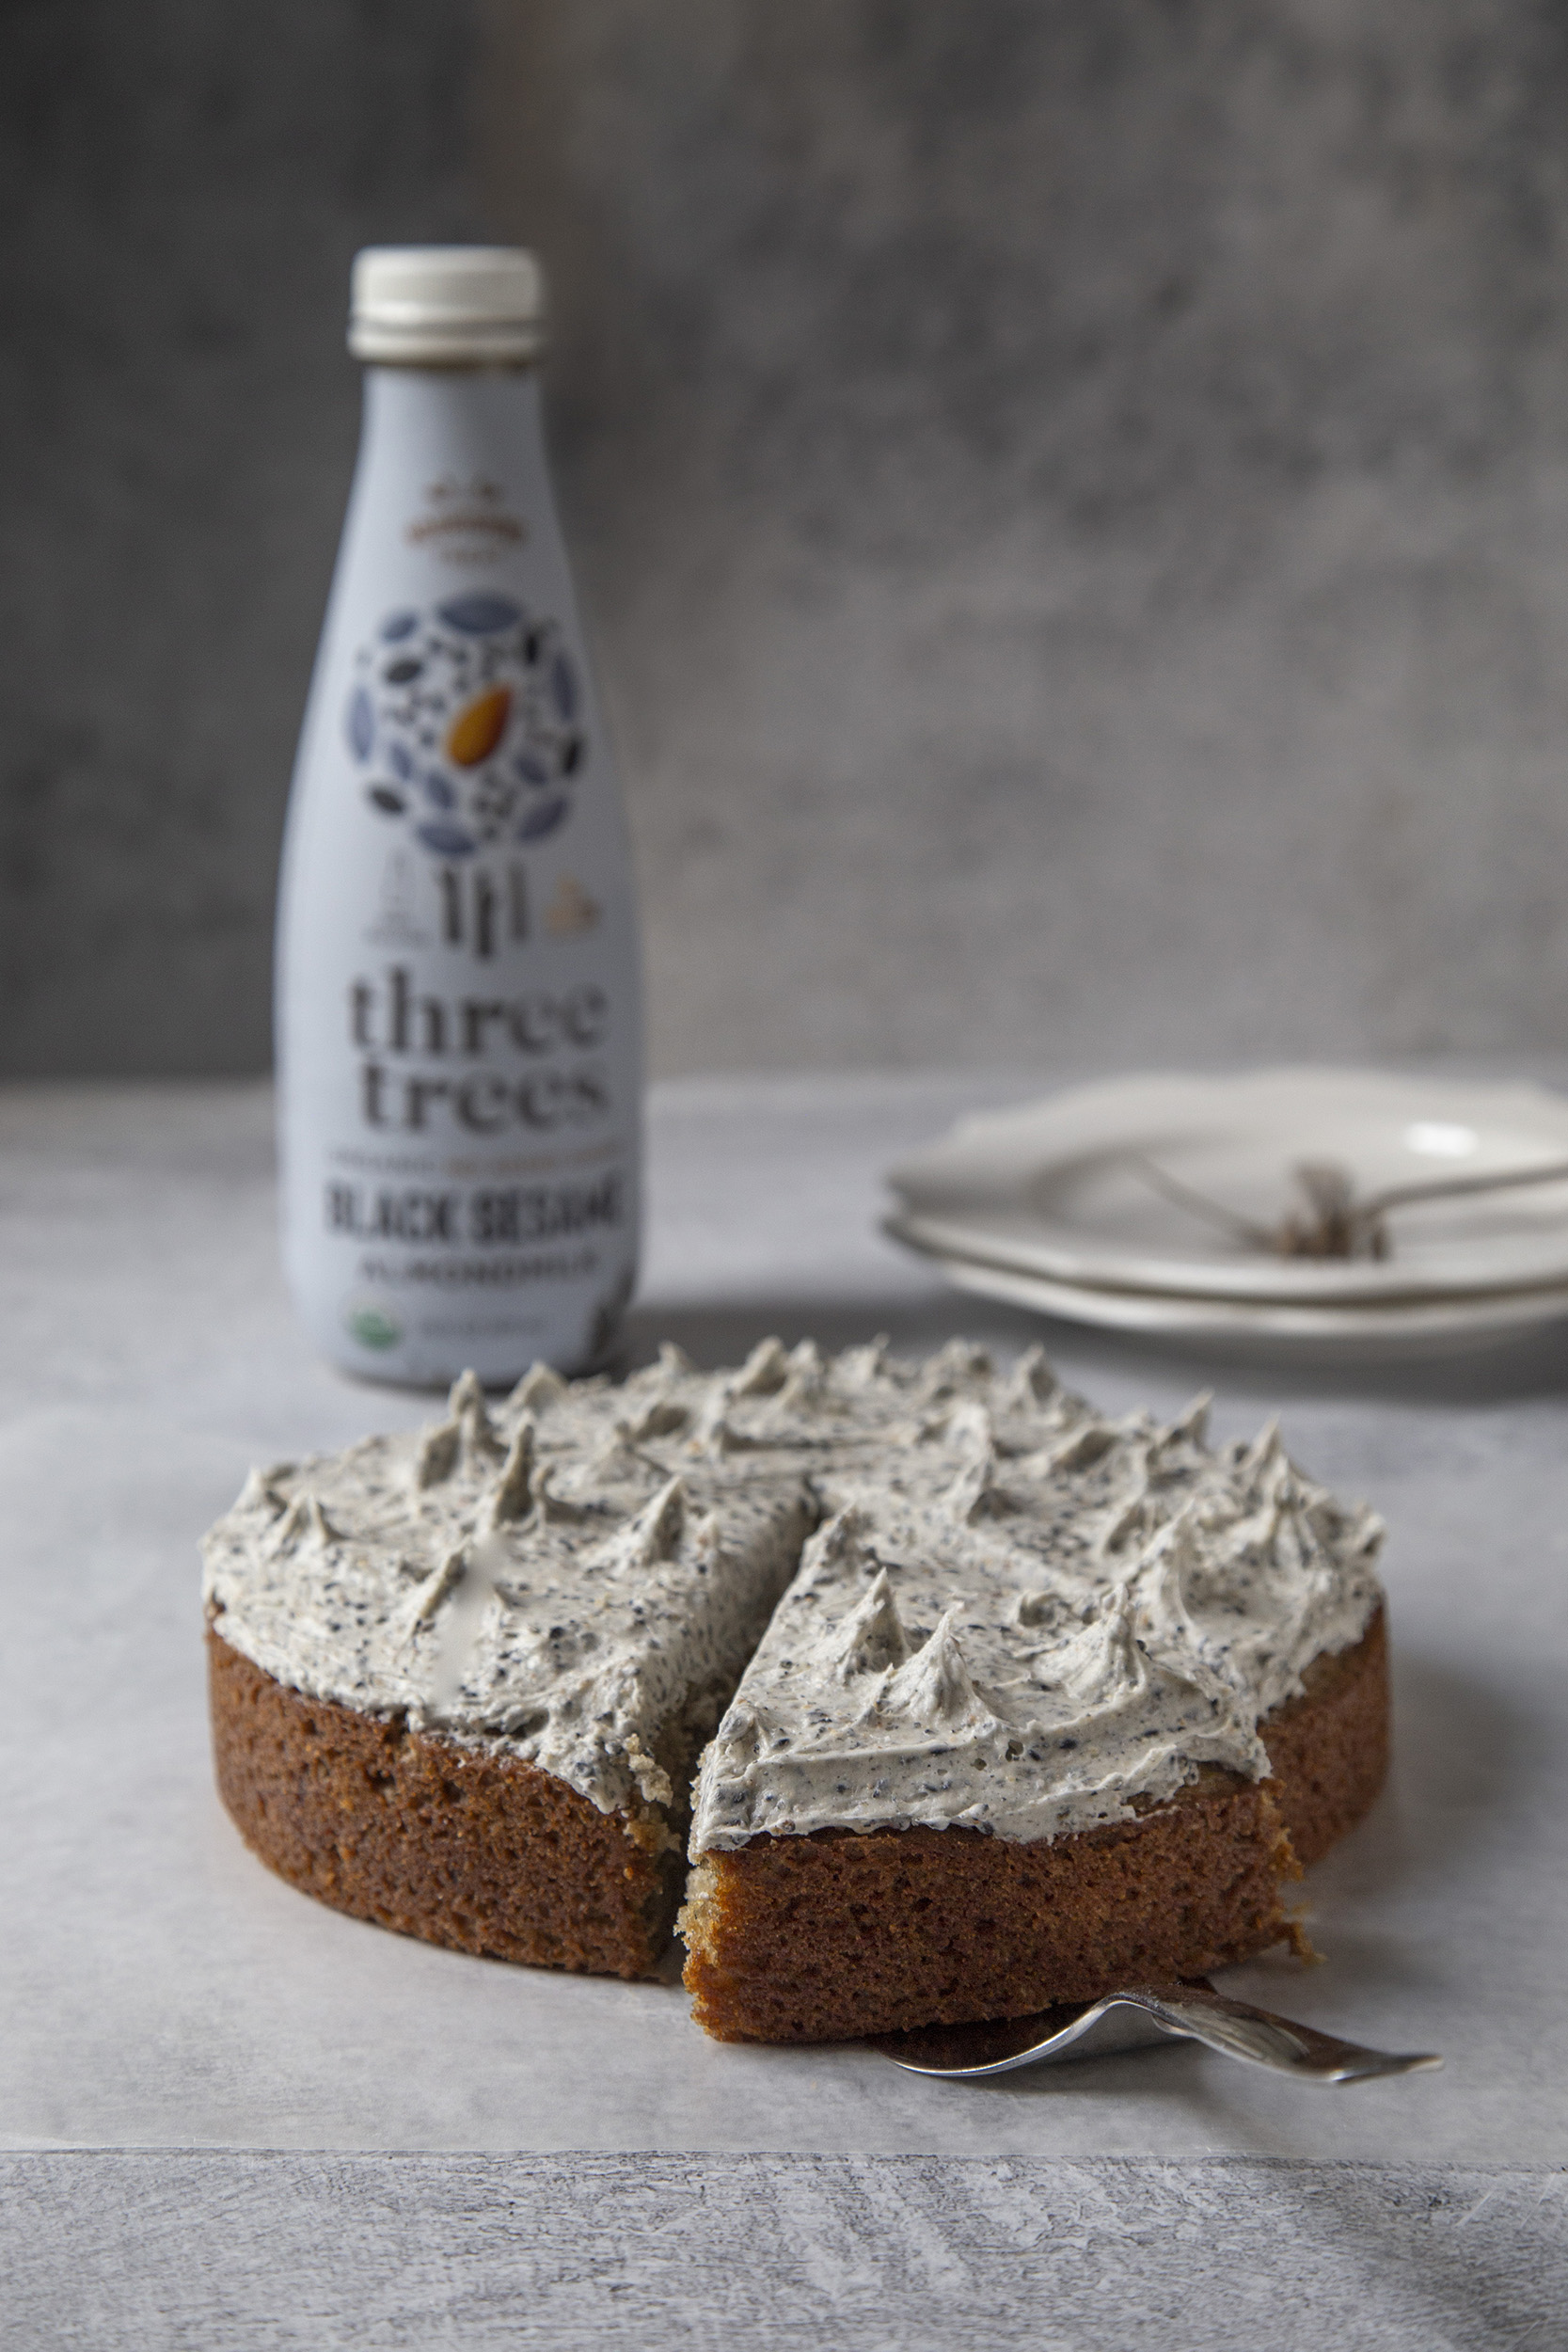 Photo of black sesame cake in the foreground with one slice cut. In the background is white plates and forks, and black sesame almond milk bottle